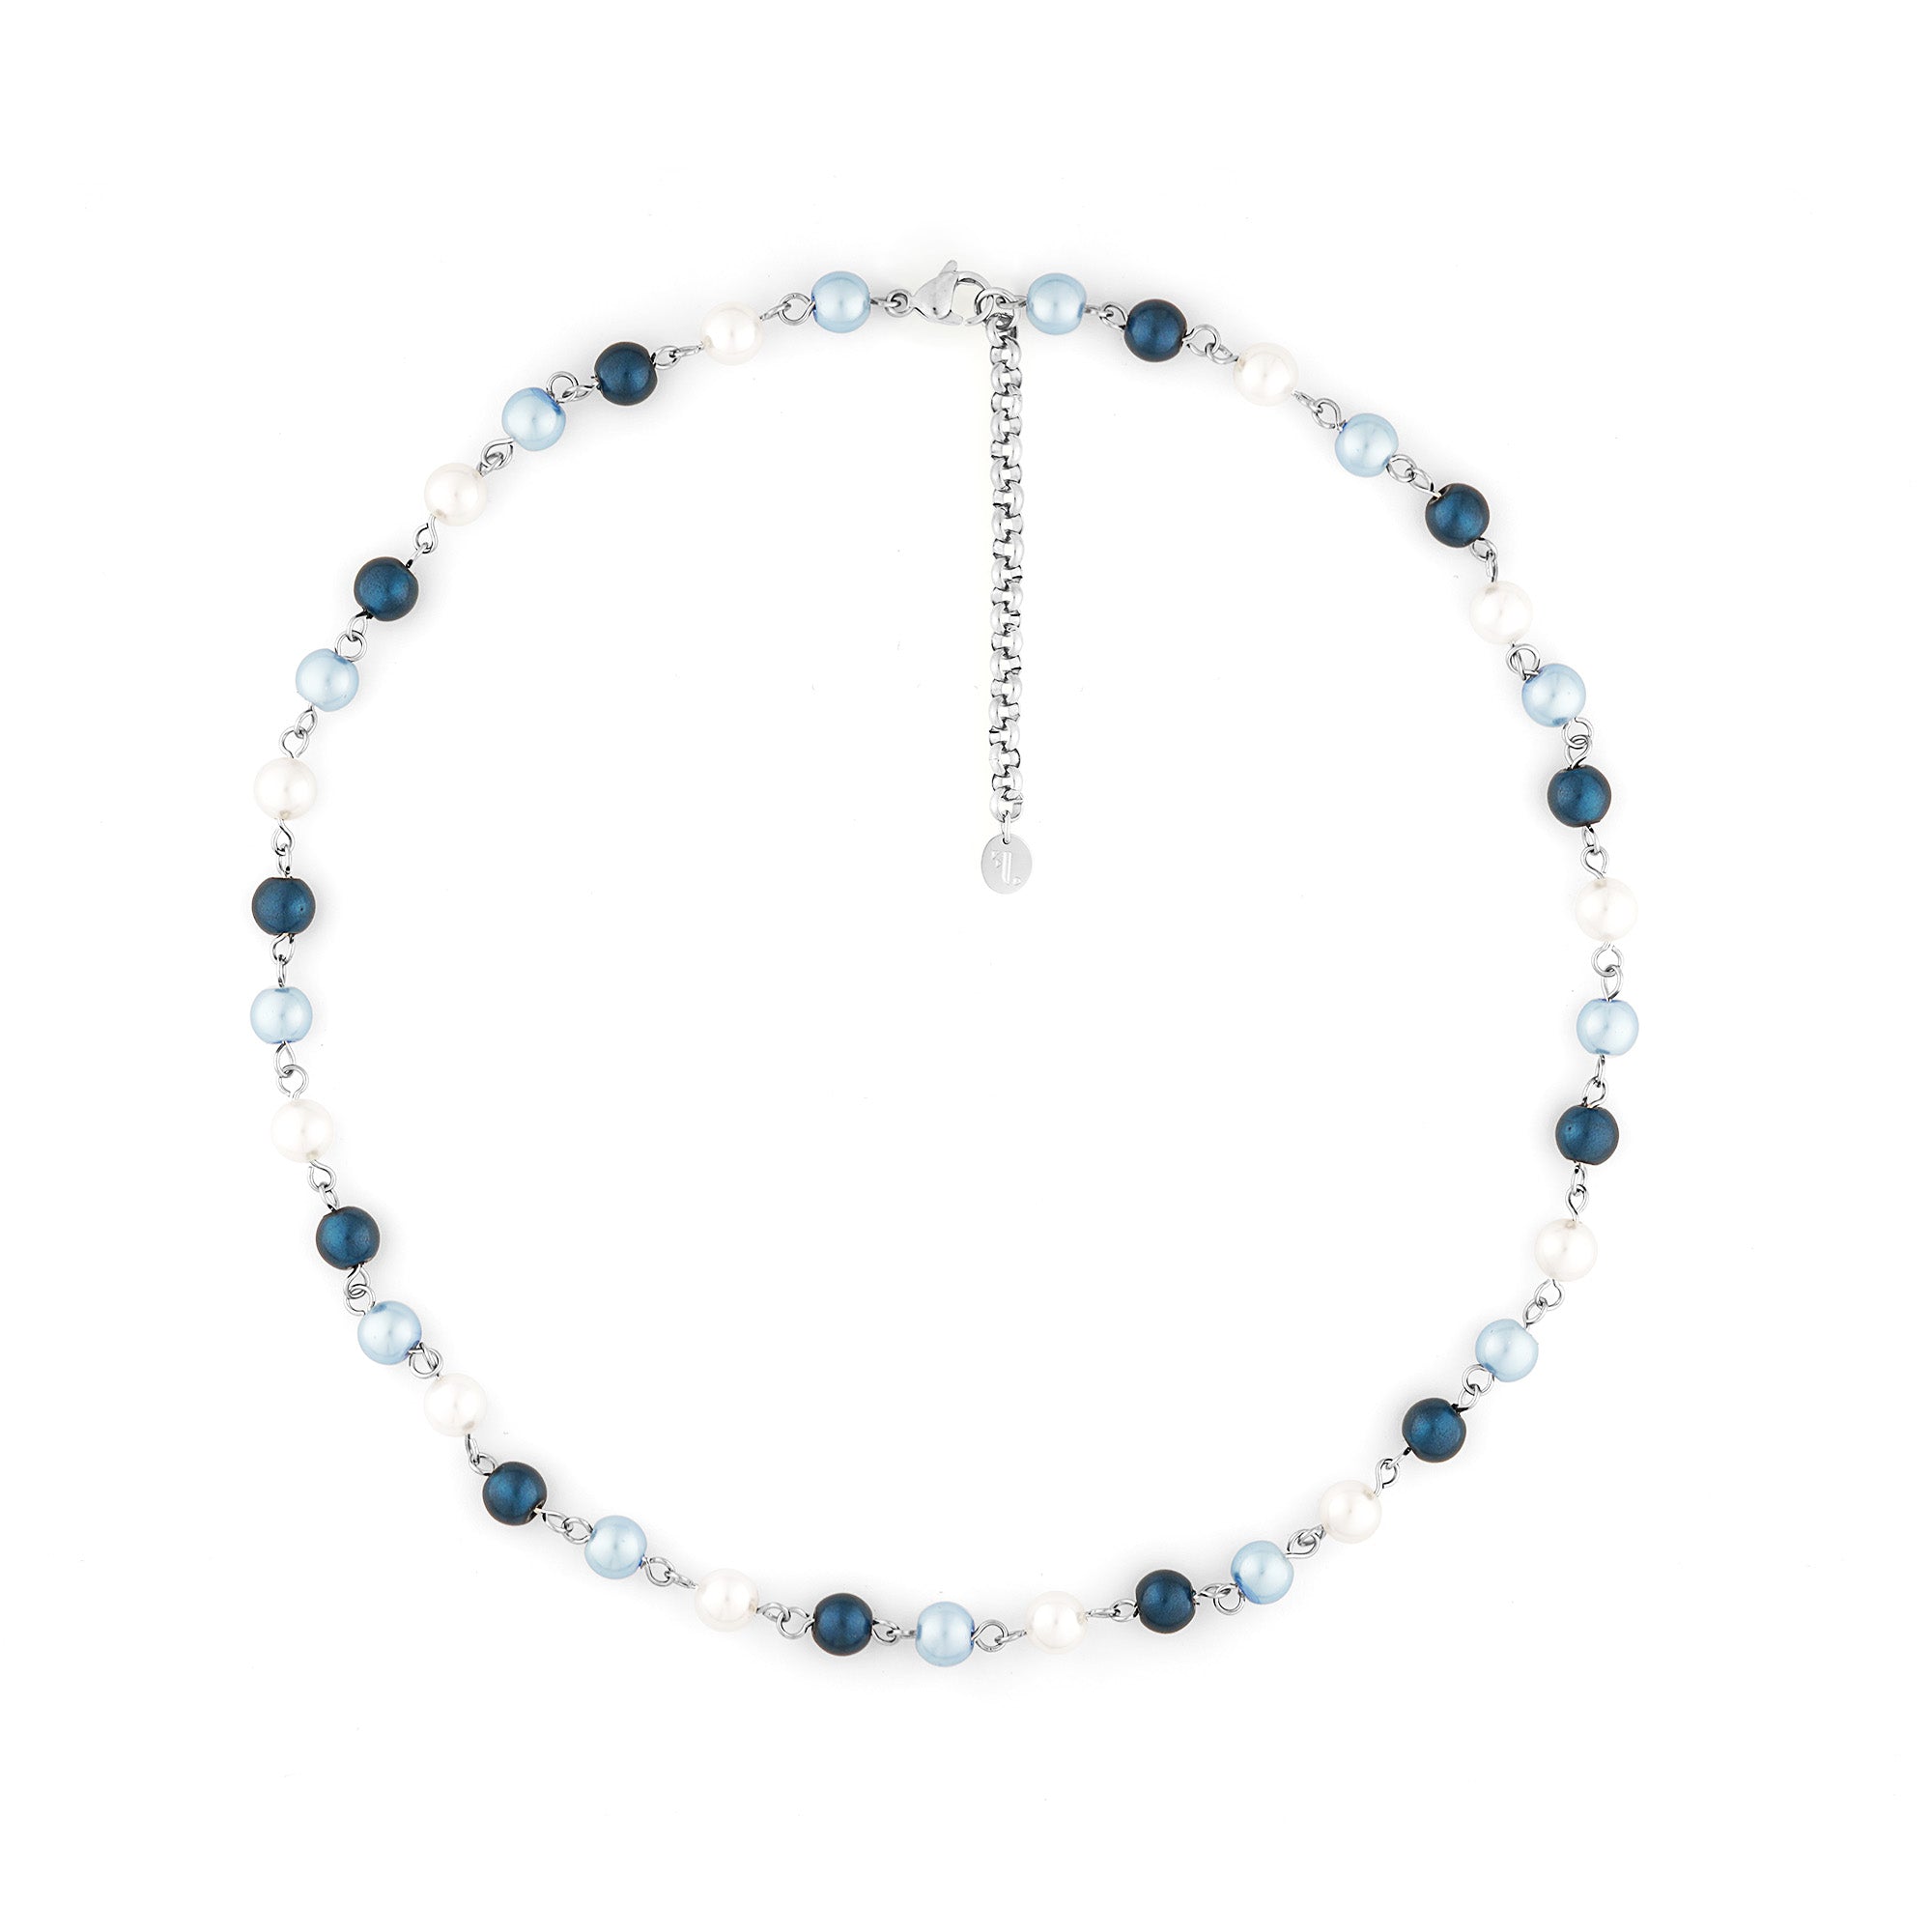 Five jewelry pearls necklace made with 2 shades of blue glass beads and white pearls, crafted with natural shell. 45cm + 5cm extension, rollo chain for adjustment. Fashion accessory, statement jewelry. Designed in Montreal, Canada.